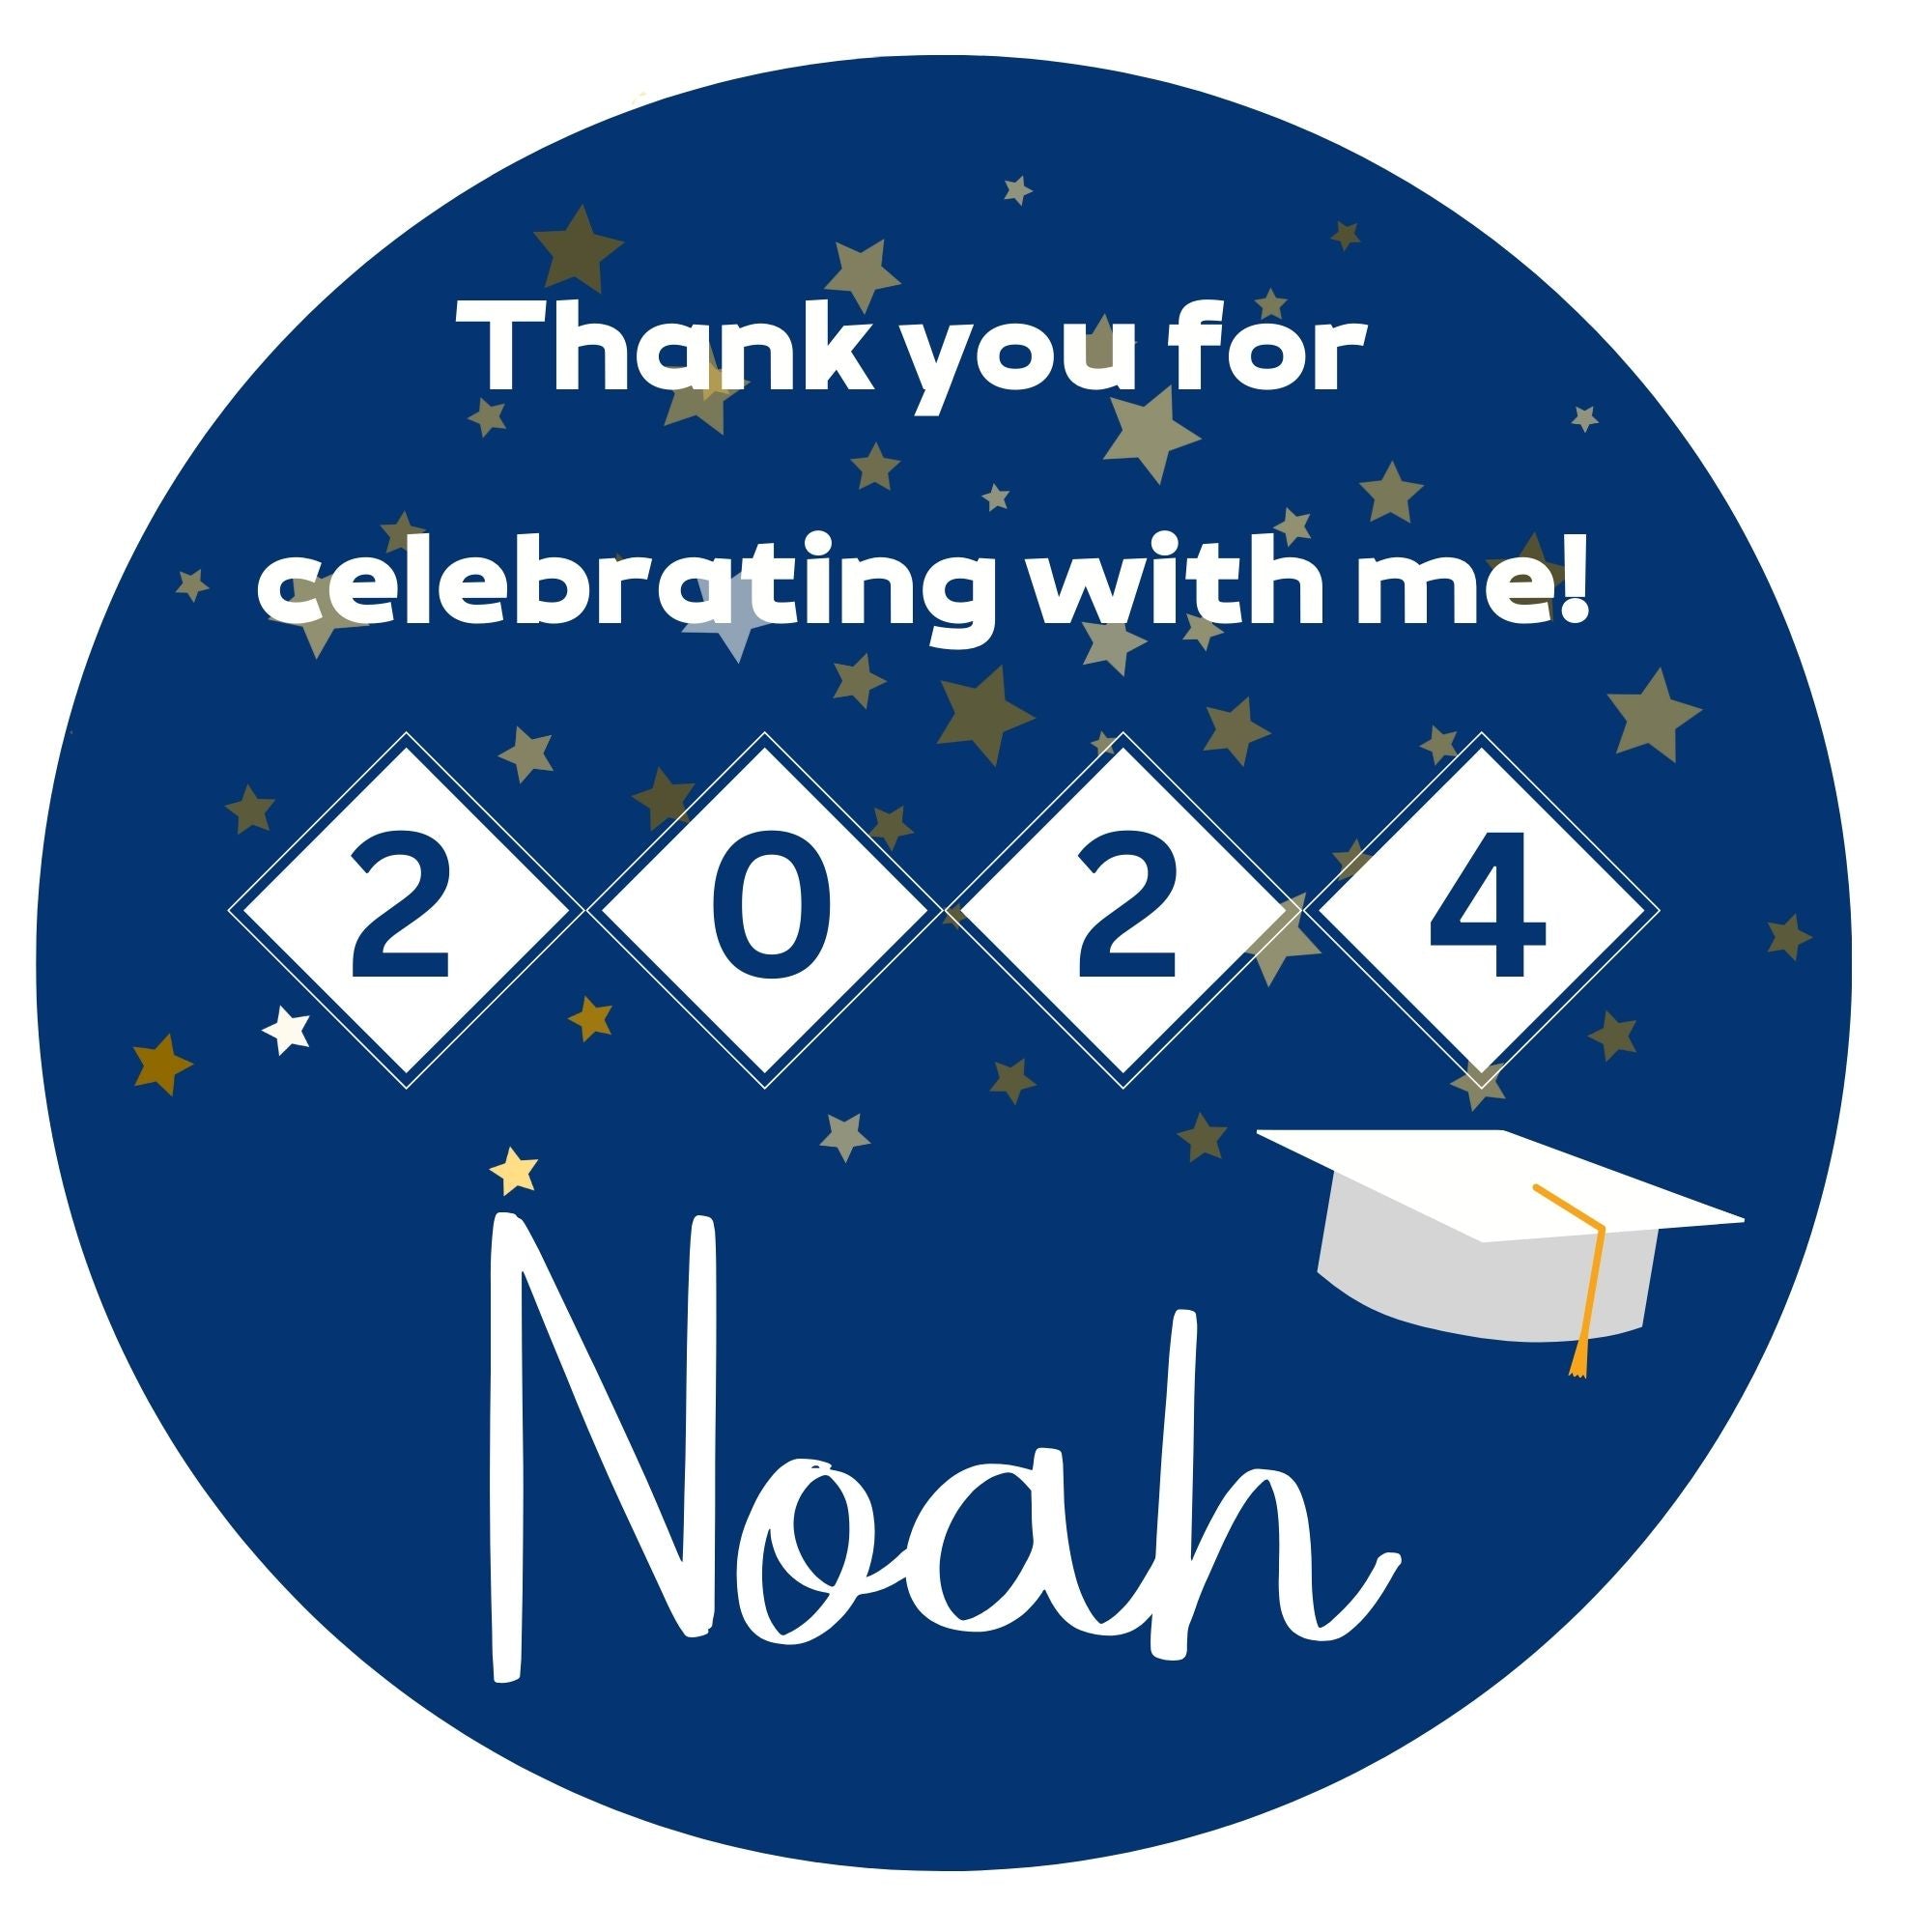 Personalized Grad Party Sticker Bundle - Stars Thank You!